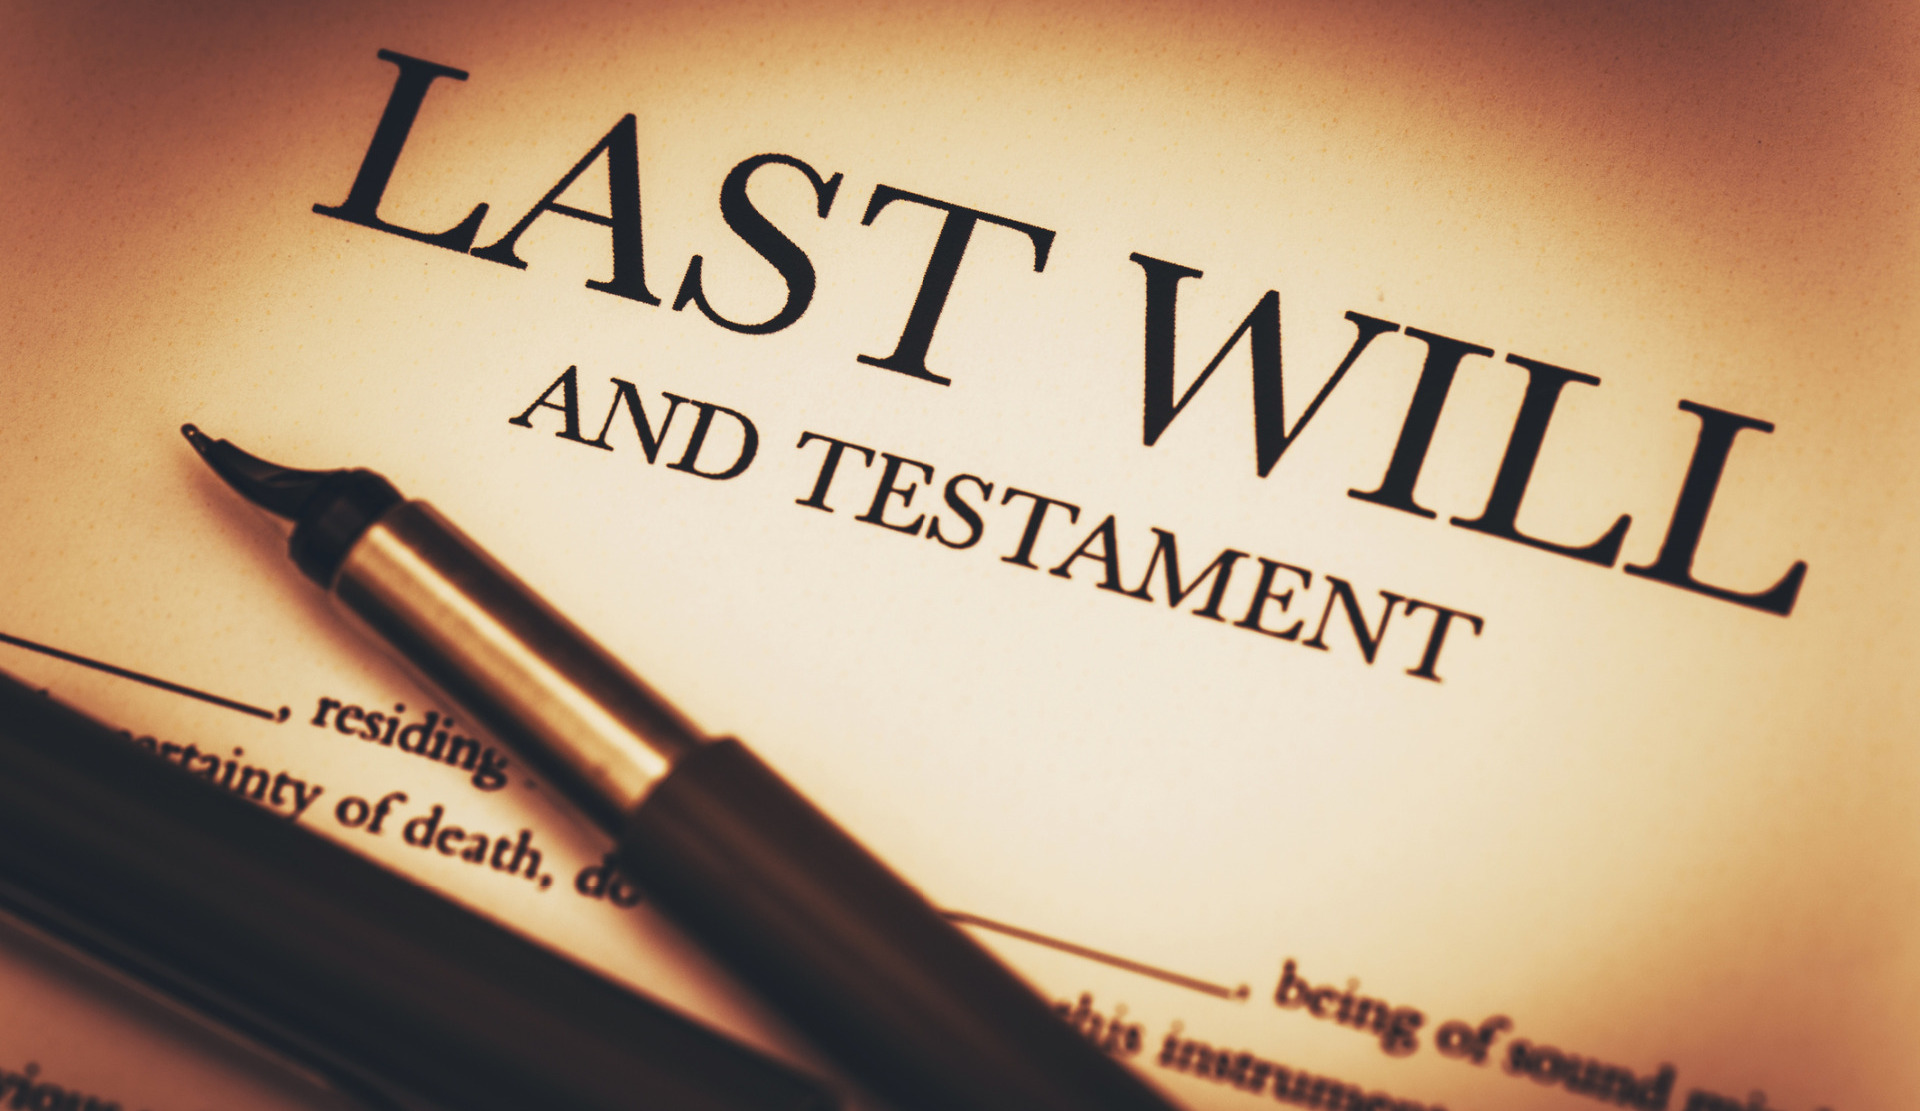 "Last Will and Testament" paper, with a pen resting on top.